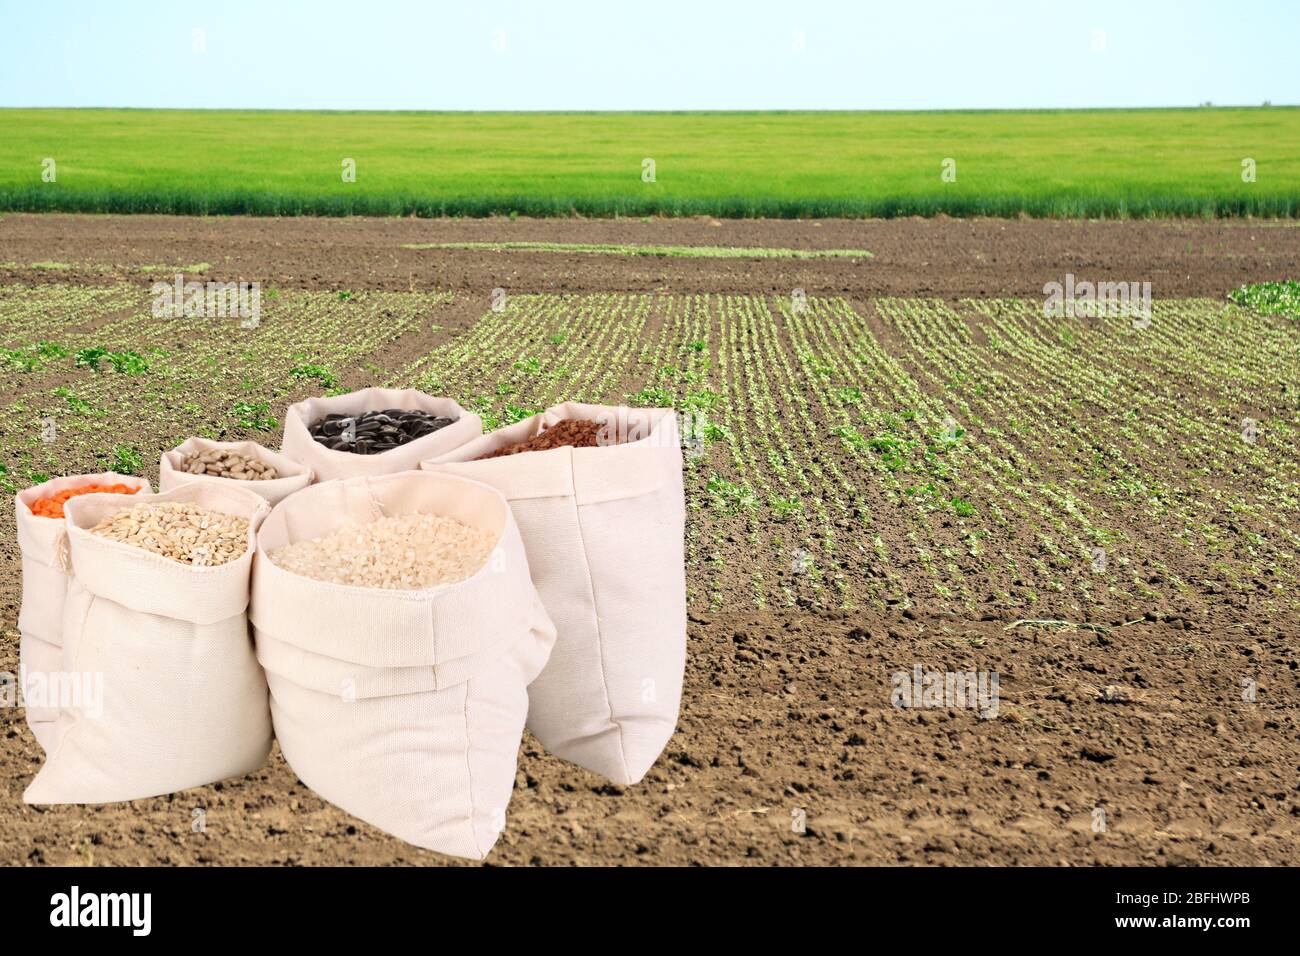 https://c8.alamy.com/comp/2BFHWPB/cloth-bags-with-grain-on-field-background-2BFHWPB.jpg